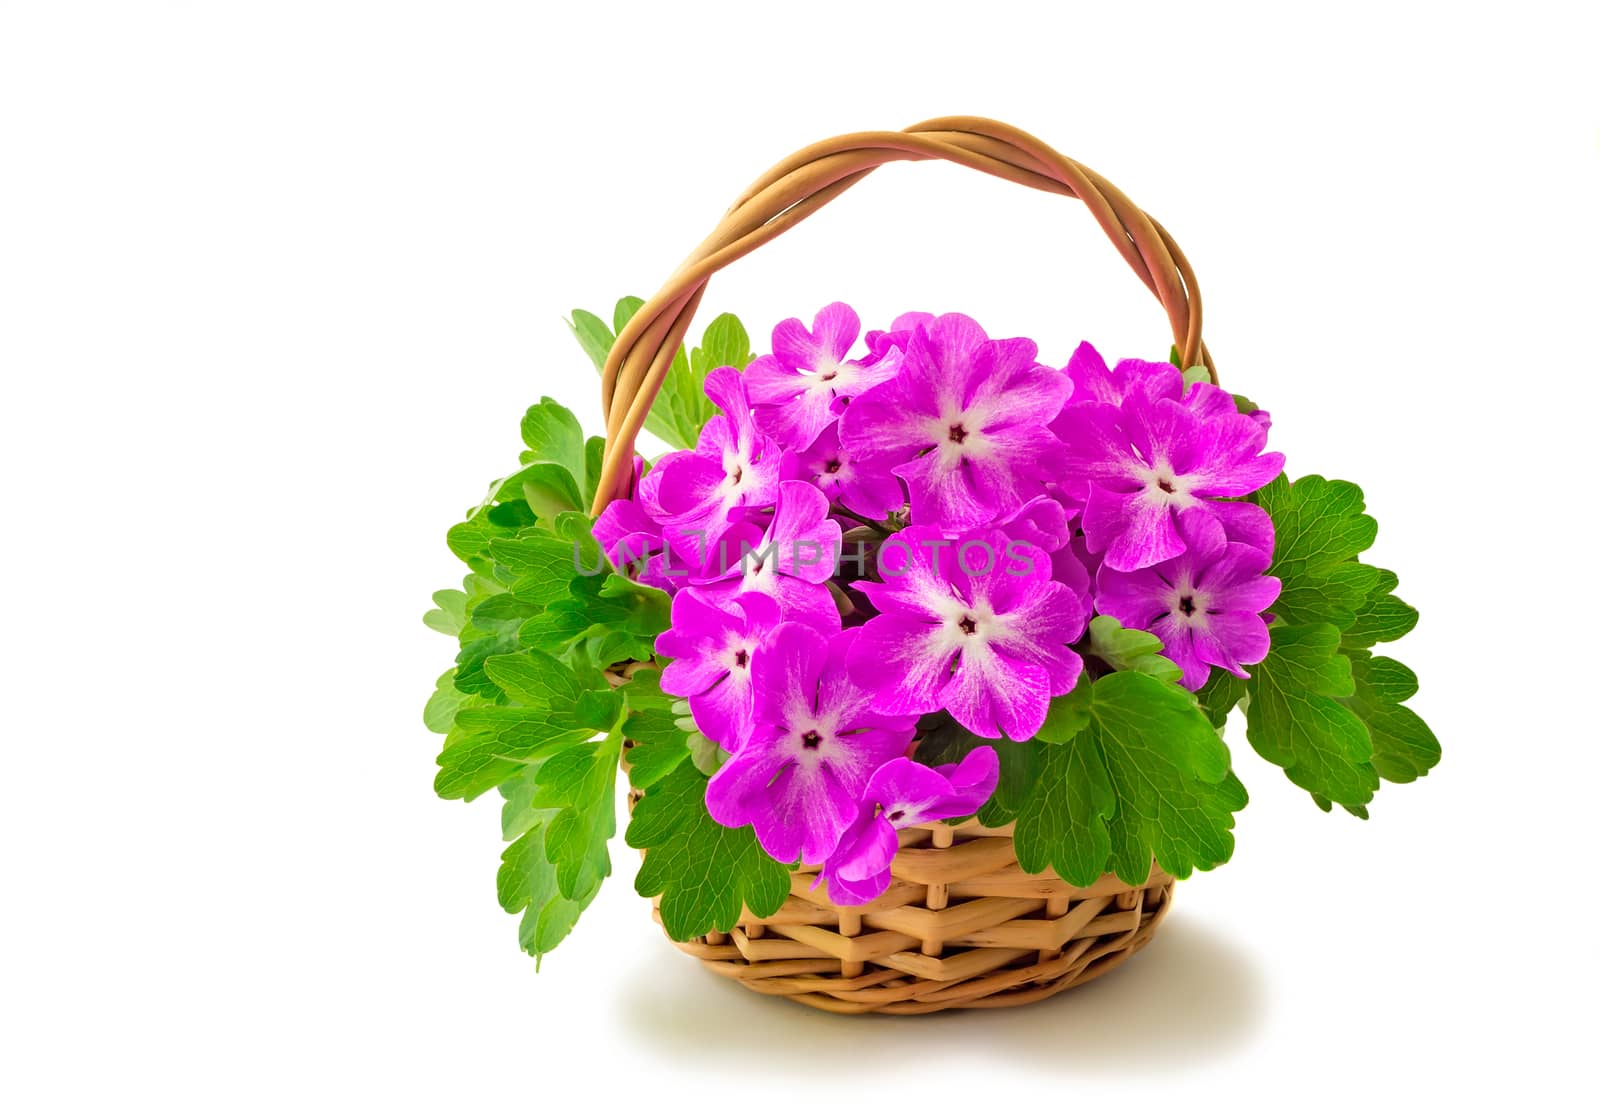 Basket with blossoming violets on a white background. by georgina198